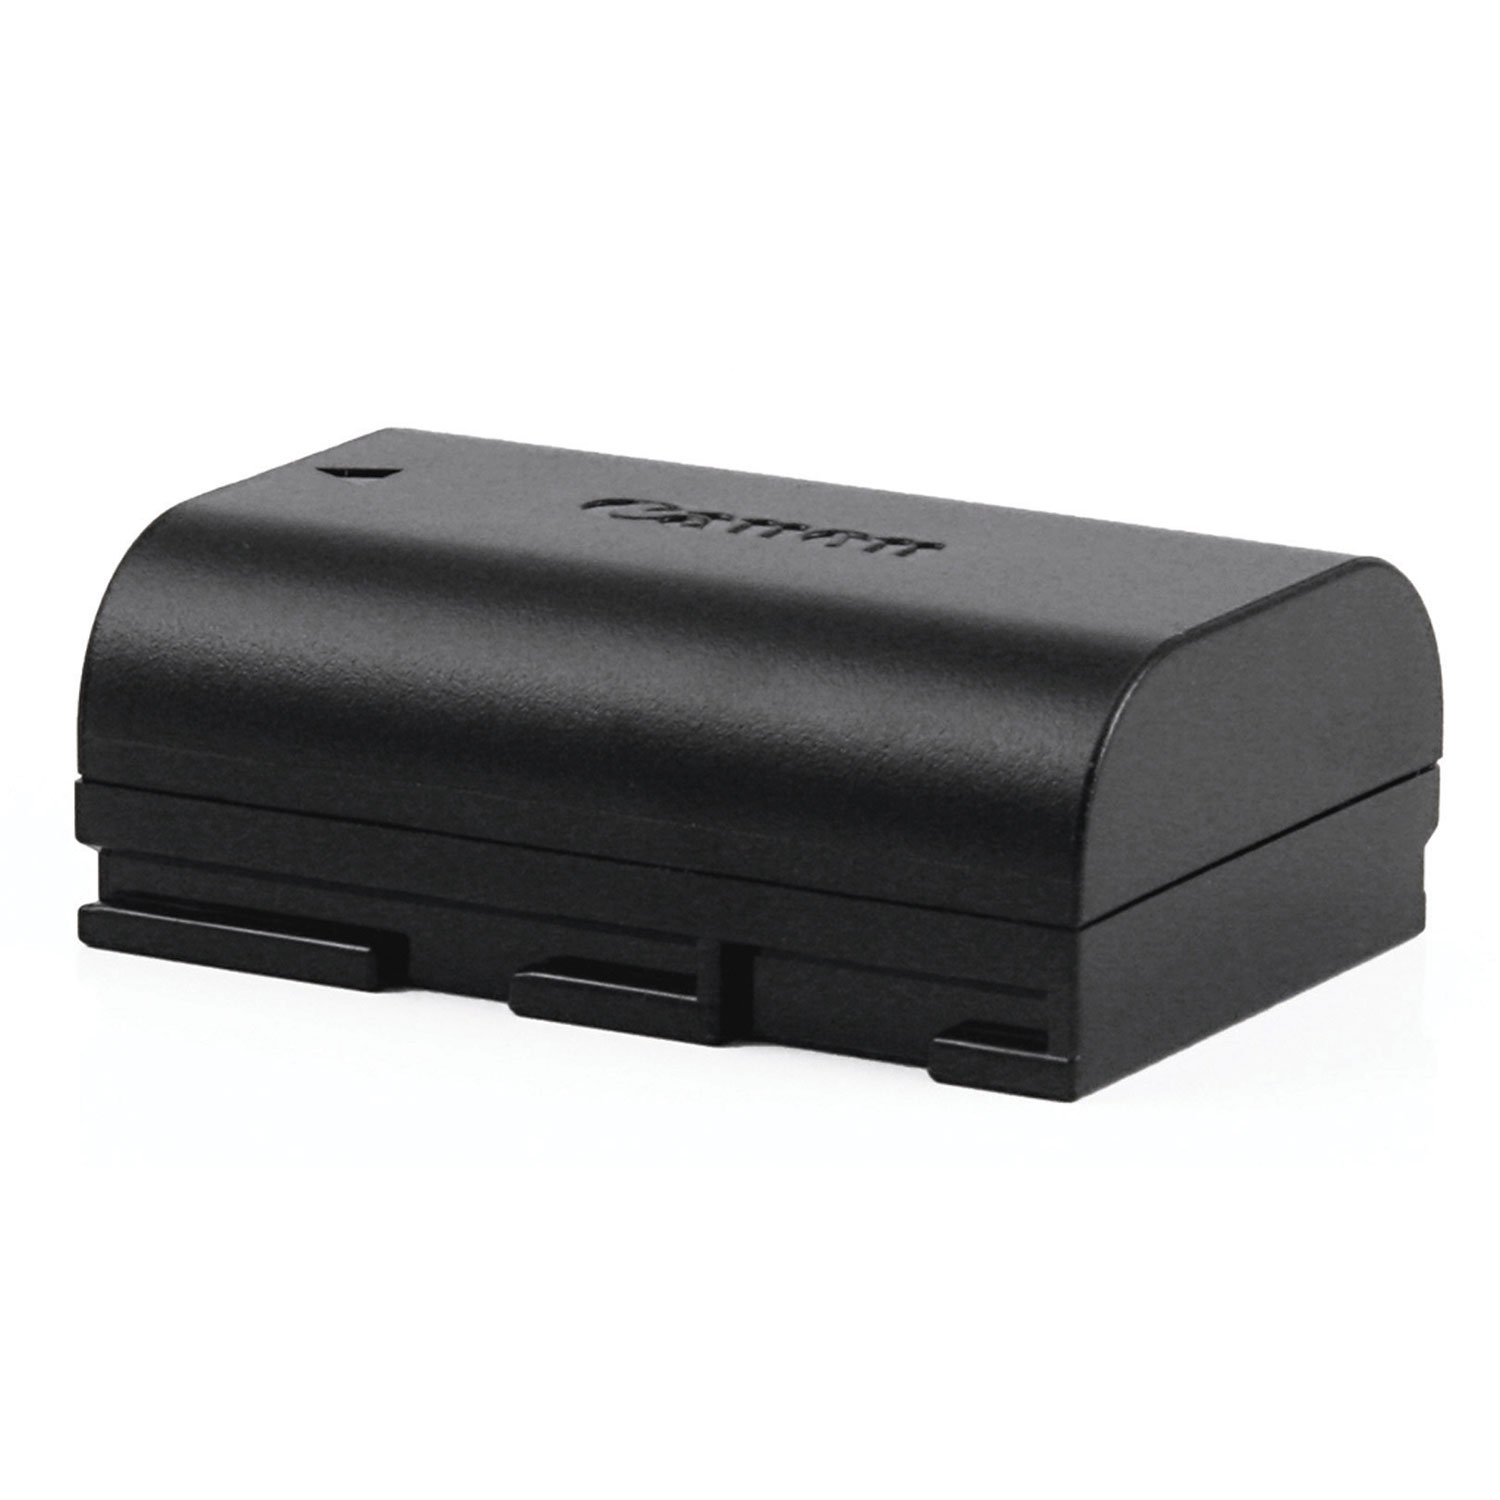 Canon battery pack